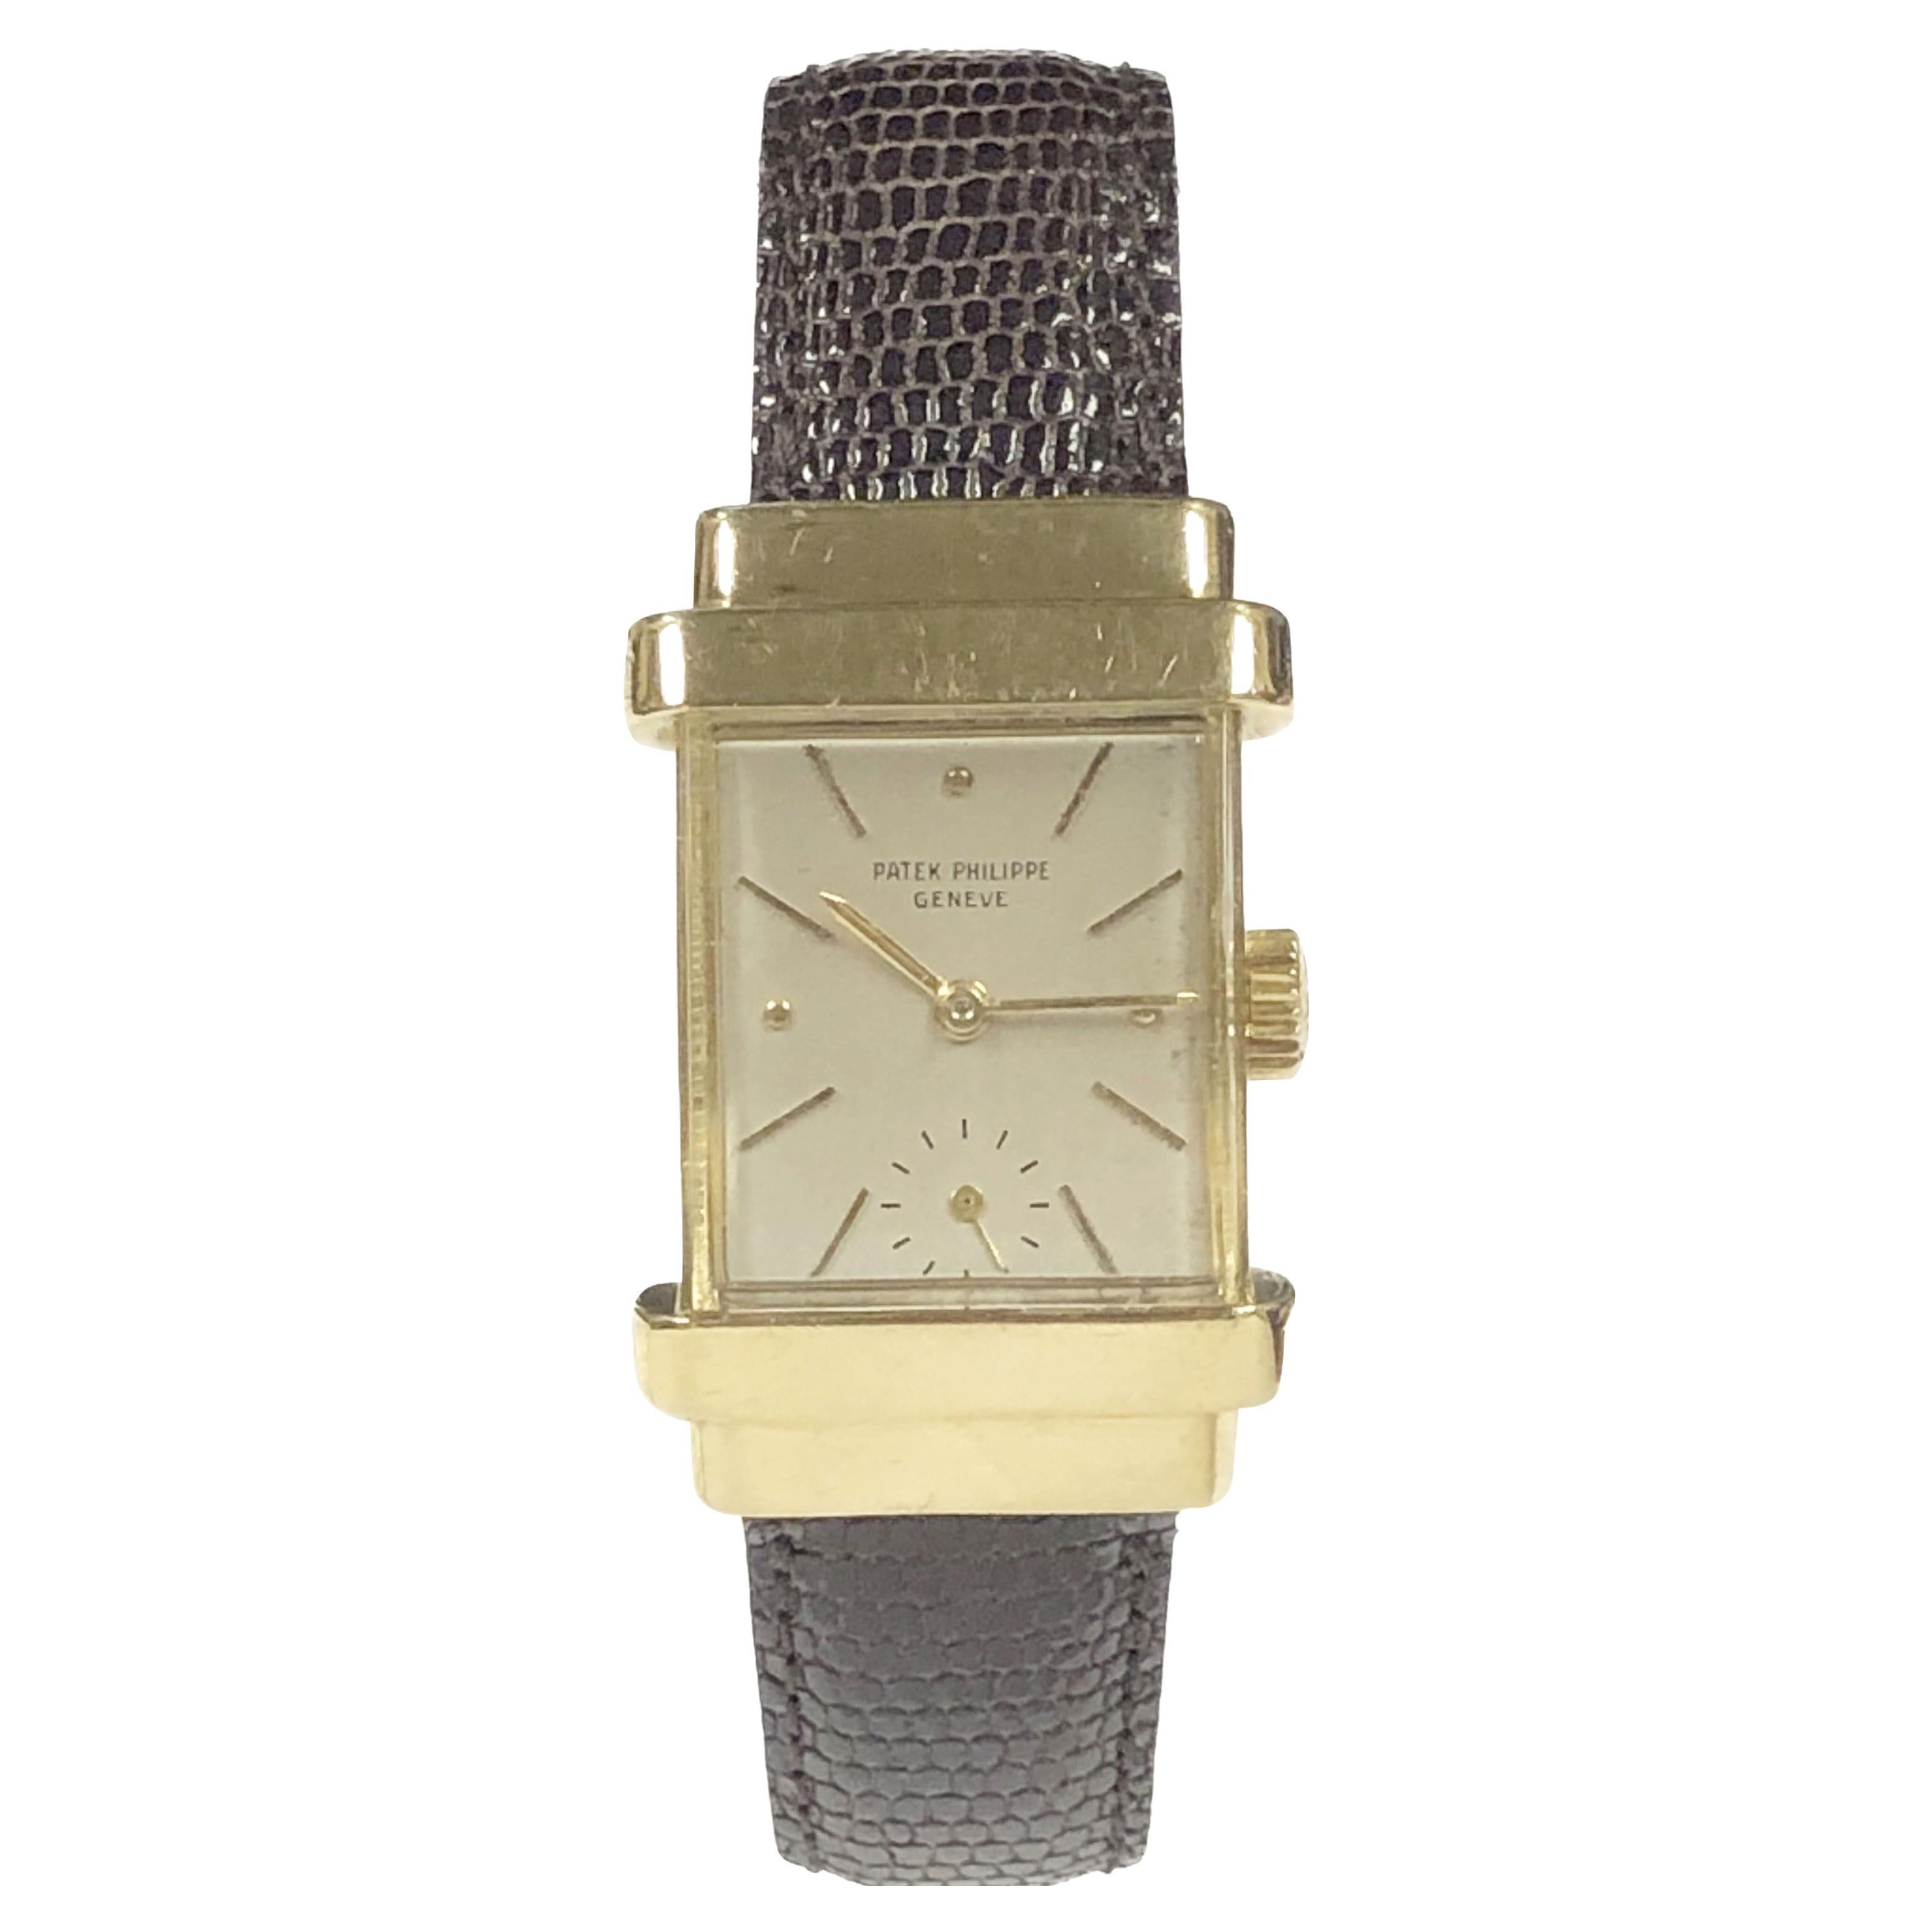 Patek Philippe "Top Hat" Refre 1450 Yellow Gold Wrist Watch